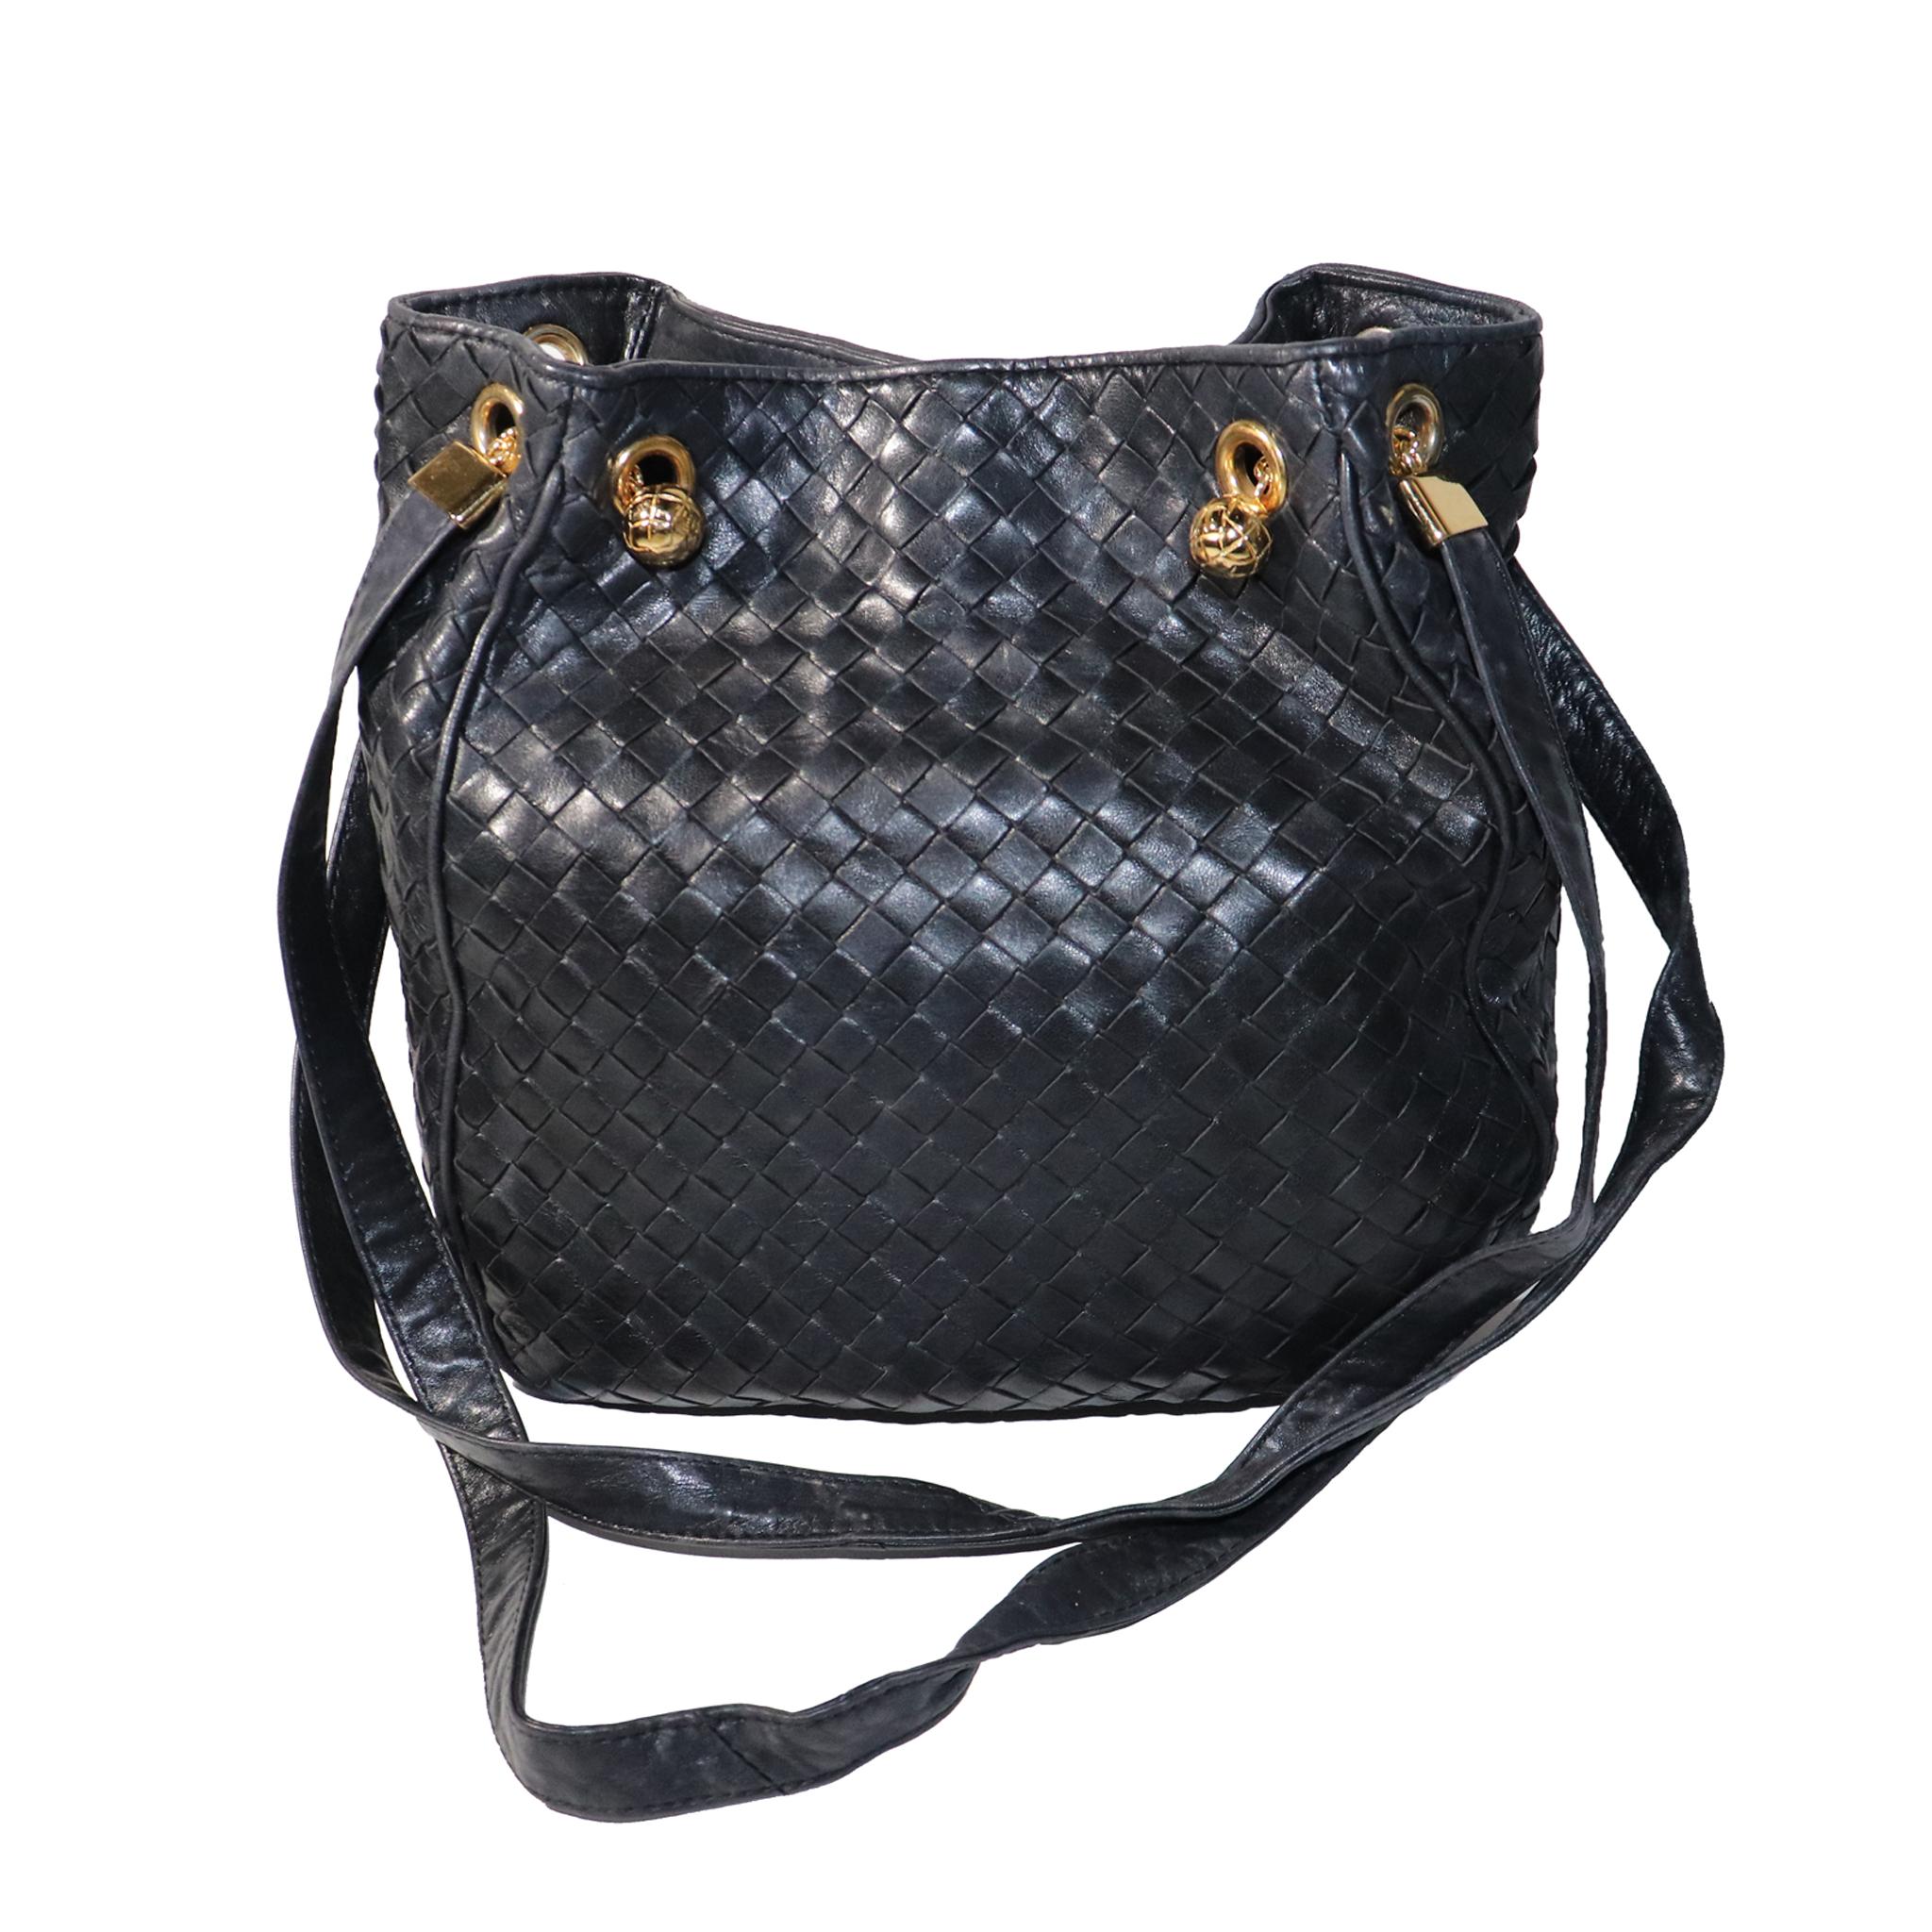 Bottega Veneta Black Classic Woven Bucket Shoulder bag W/ Gold Accents. 
Coated leather lining is dry with some flaking, otherwise woven leather exterior is in near perfect condition. 

Measurements: 

Height - 10.5 inches 
Width - 9 inches 
Height